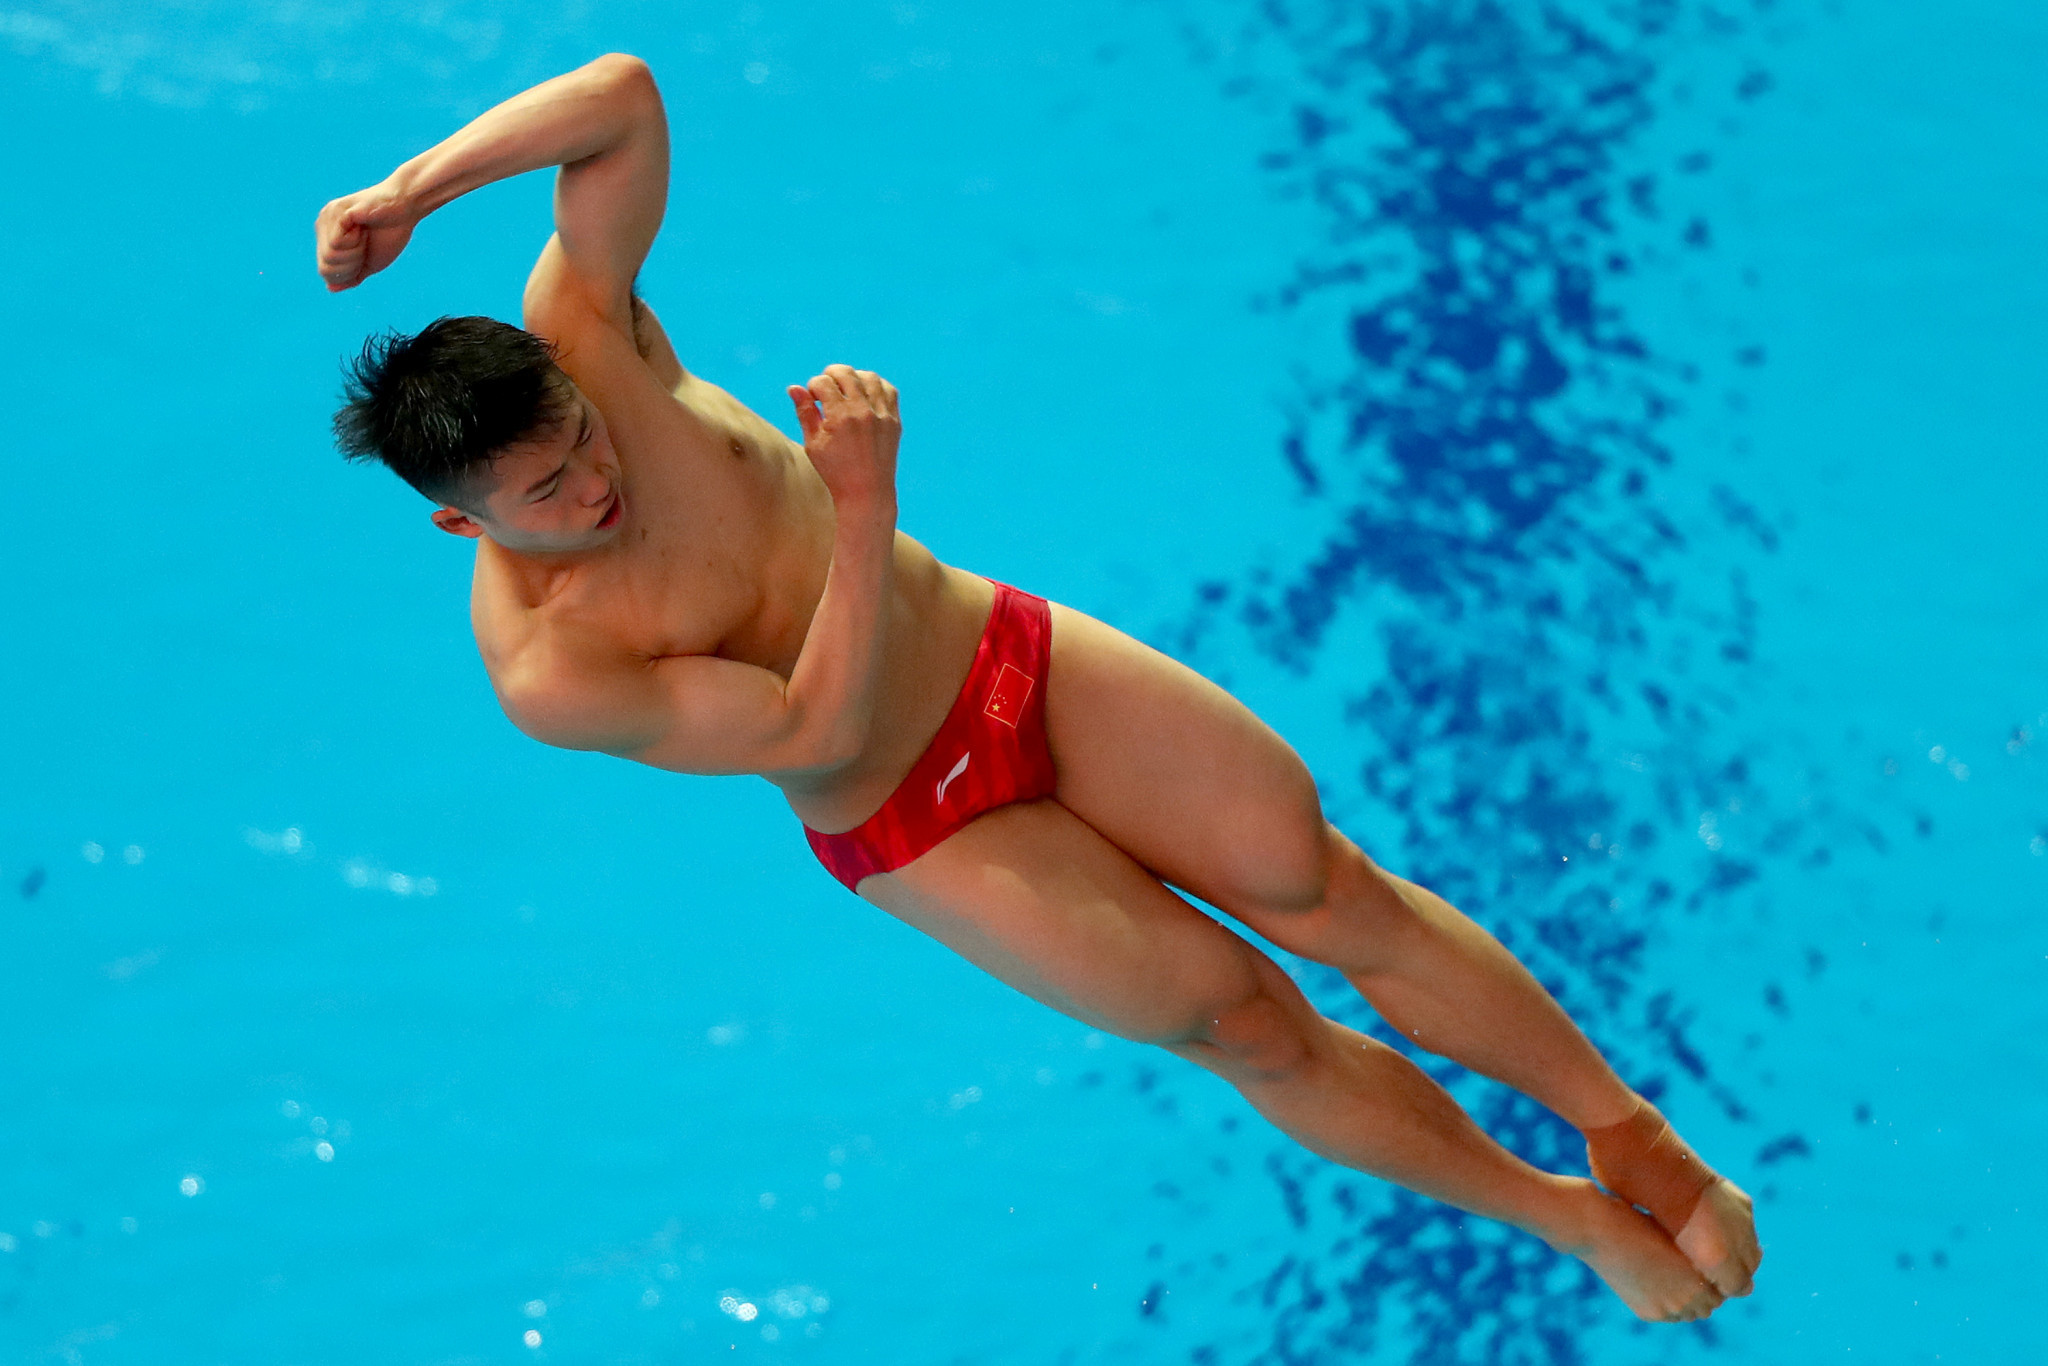 Chinese divers, including Wang Zongyuan, were in excellent form as the men’s and women’s one metre springboard preliminaries took place on the opening day of the World Aquatics Championships in Gwangju in South Korea ©Getty Images